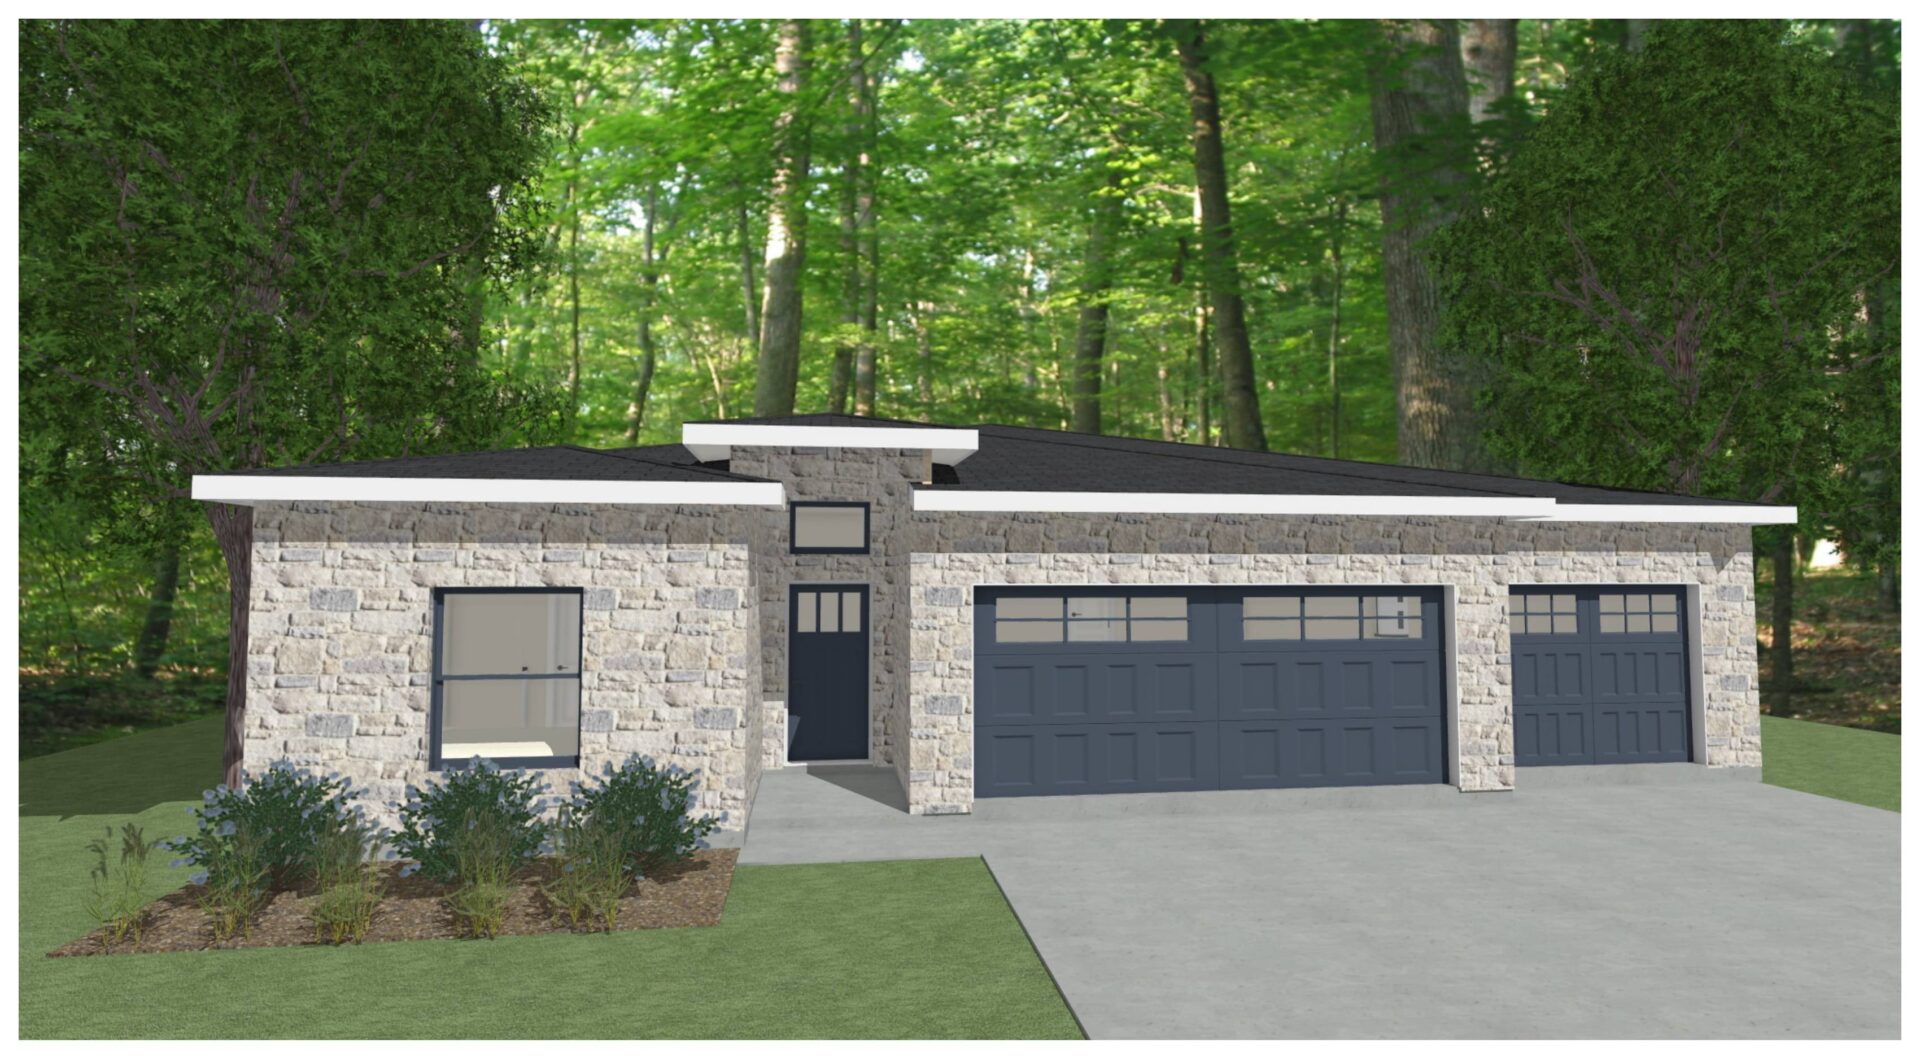 A rendering of a two - car garage in the woods.